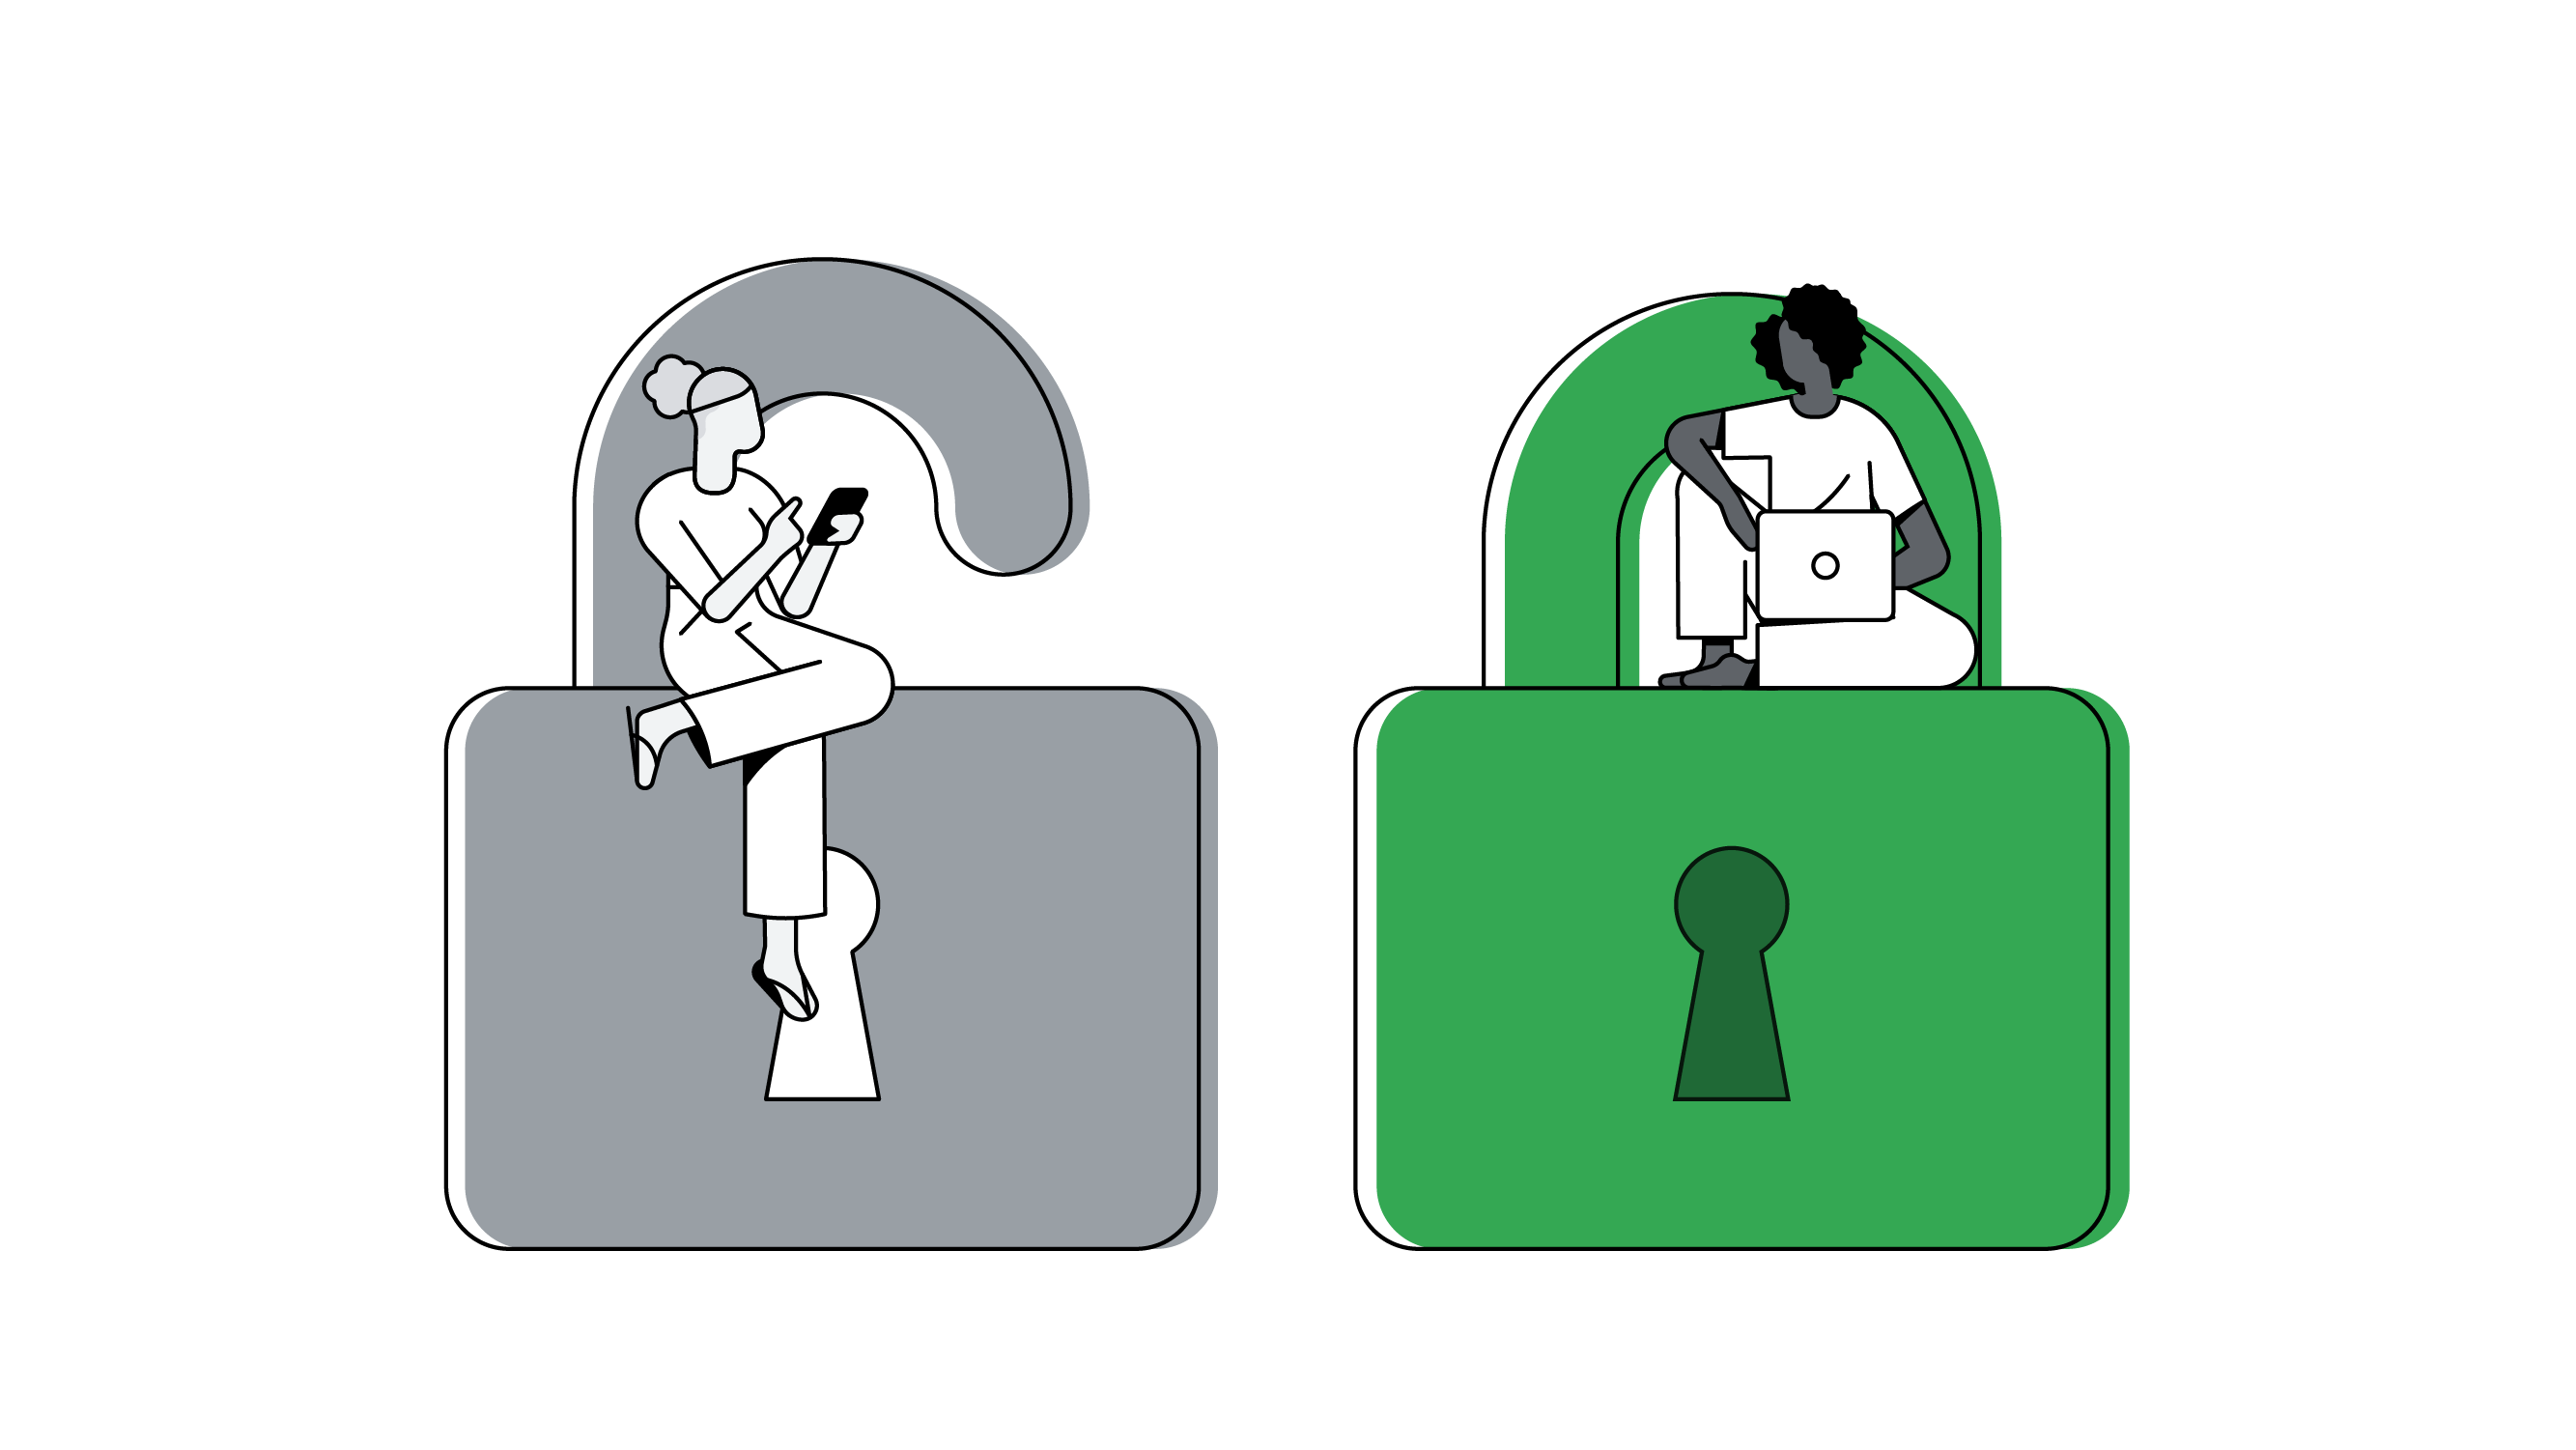 To the left, a woman sits on top of a large, grey, unlocked padlock holding a phone. To the right, a woman sits on top of a large, green, locked padlock works on a laptop.